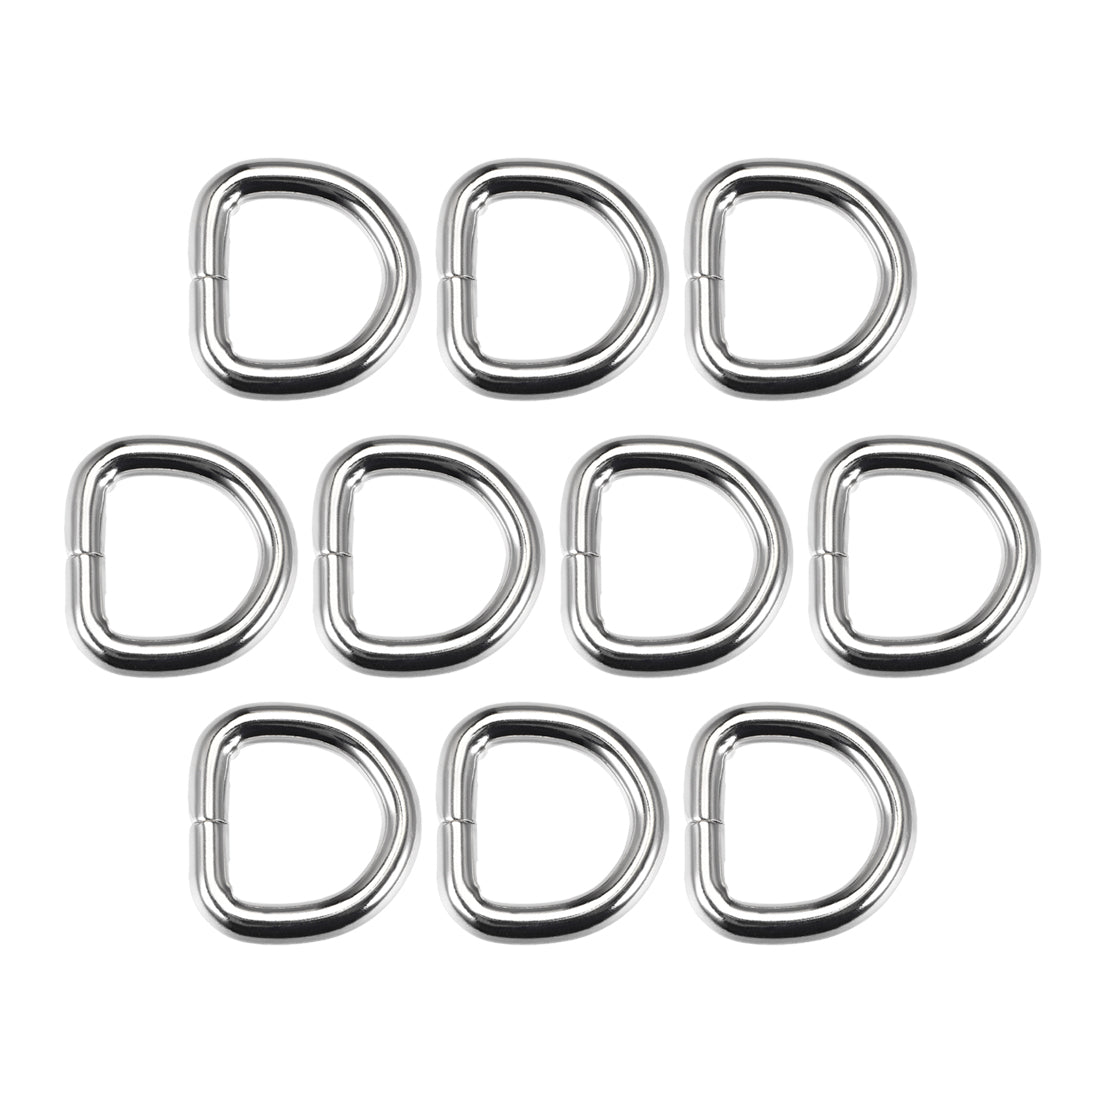 uxcell Uxcell 10 Pcs D Ring Buckle 0.63 Inch Metal Semi-Circular D-Rings Silver Tone for Hardware Bags Belts Craft DIY Accessories